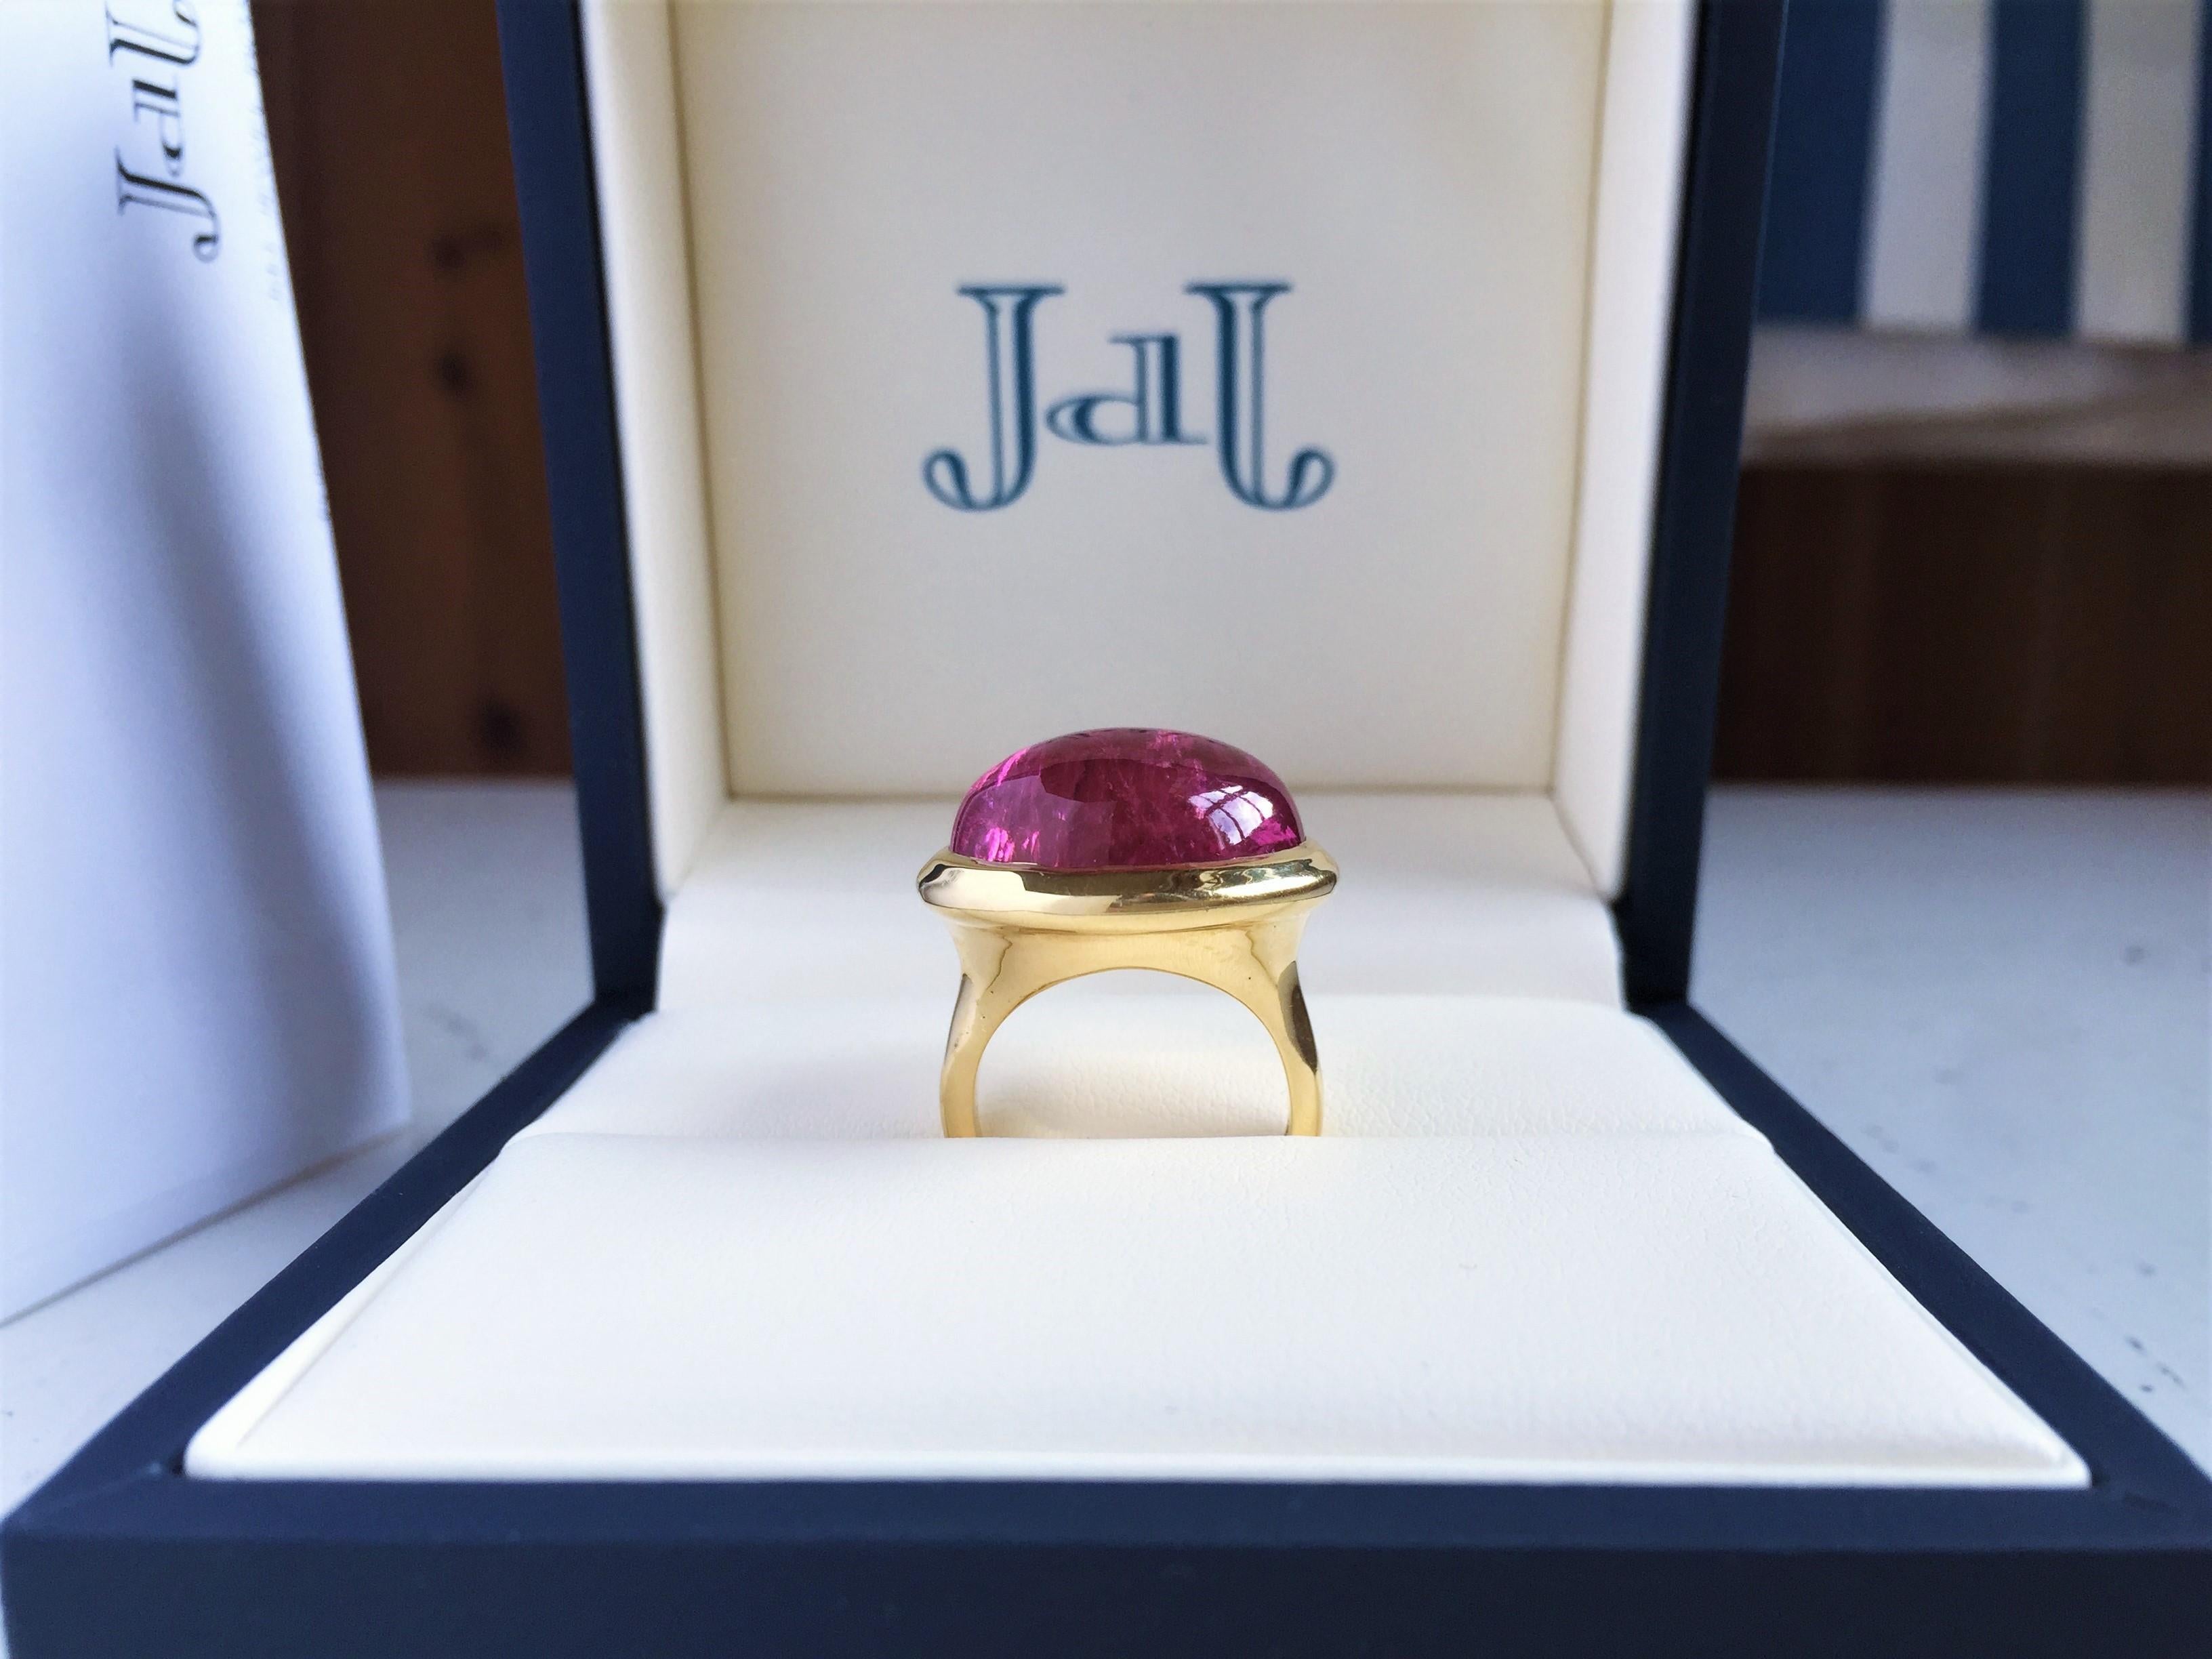 Lively Oval Cabochon Pink Tourmaline ring in 18k yellow gold set with impressive Oval Pink Tourmaline Cabochon weighing 27.15cts -  Bezel set in 18k yellow gold mount - size 6 


